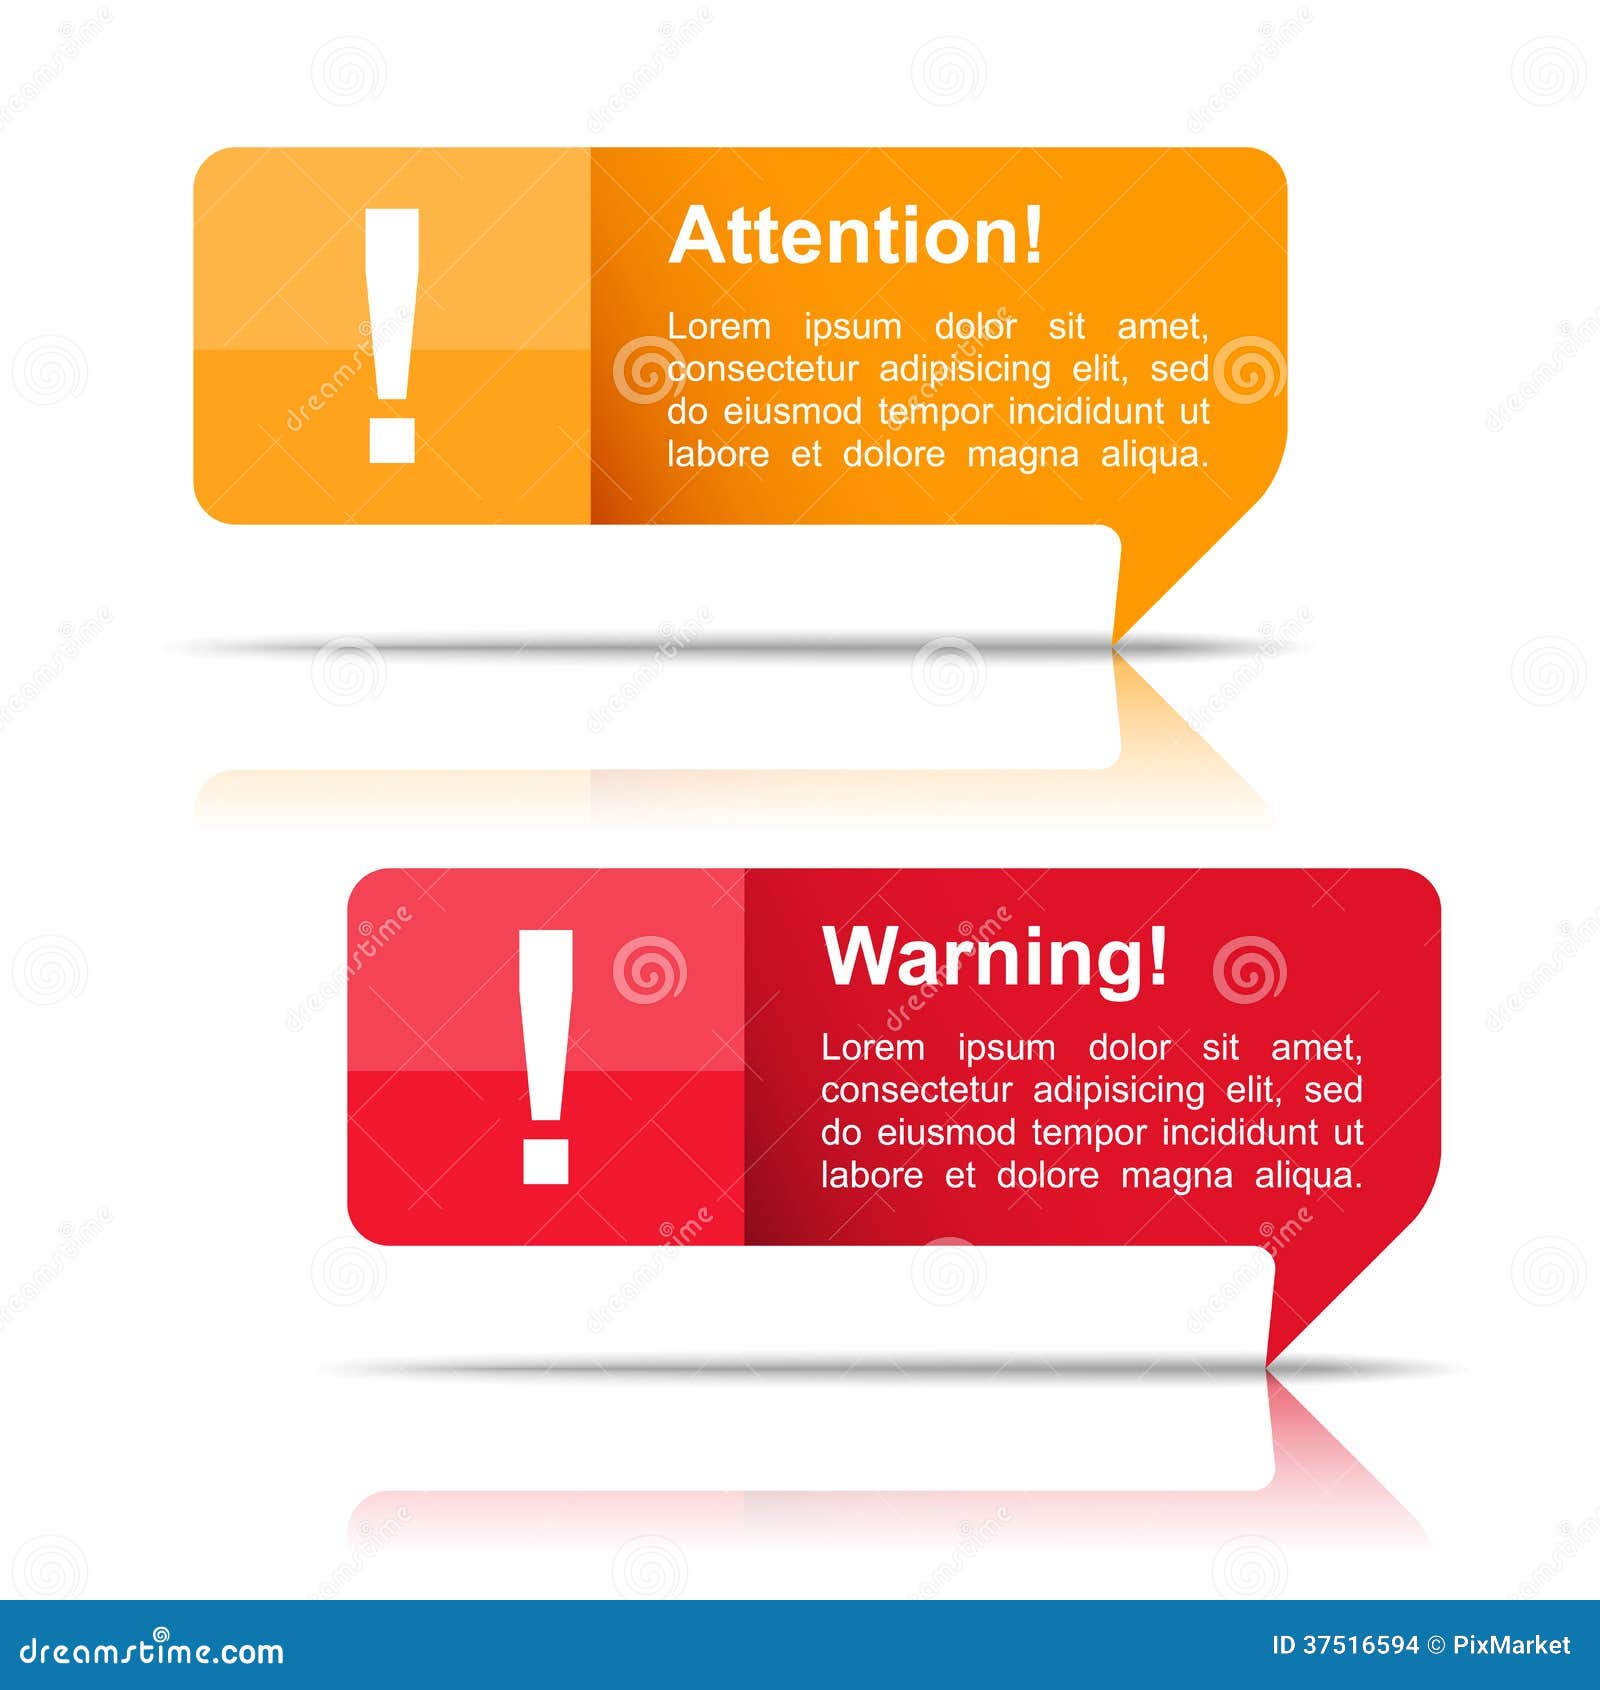 attention and warning banners